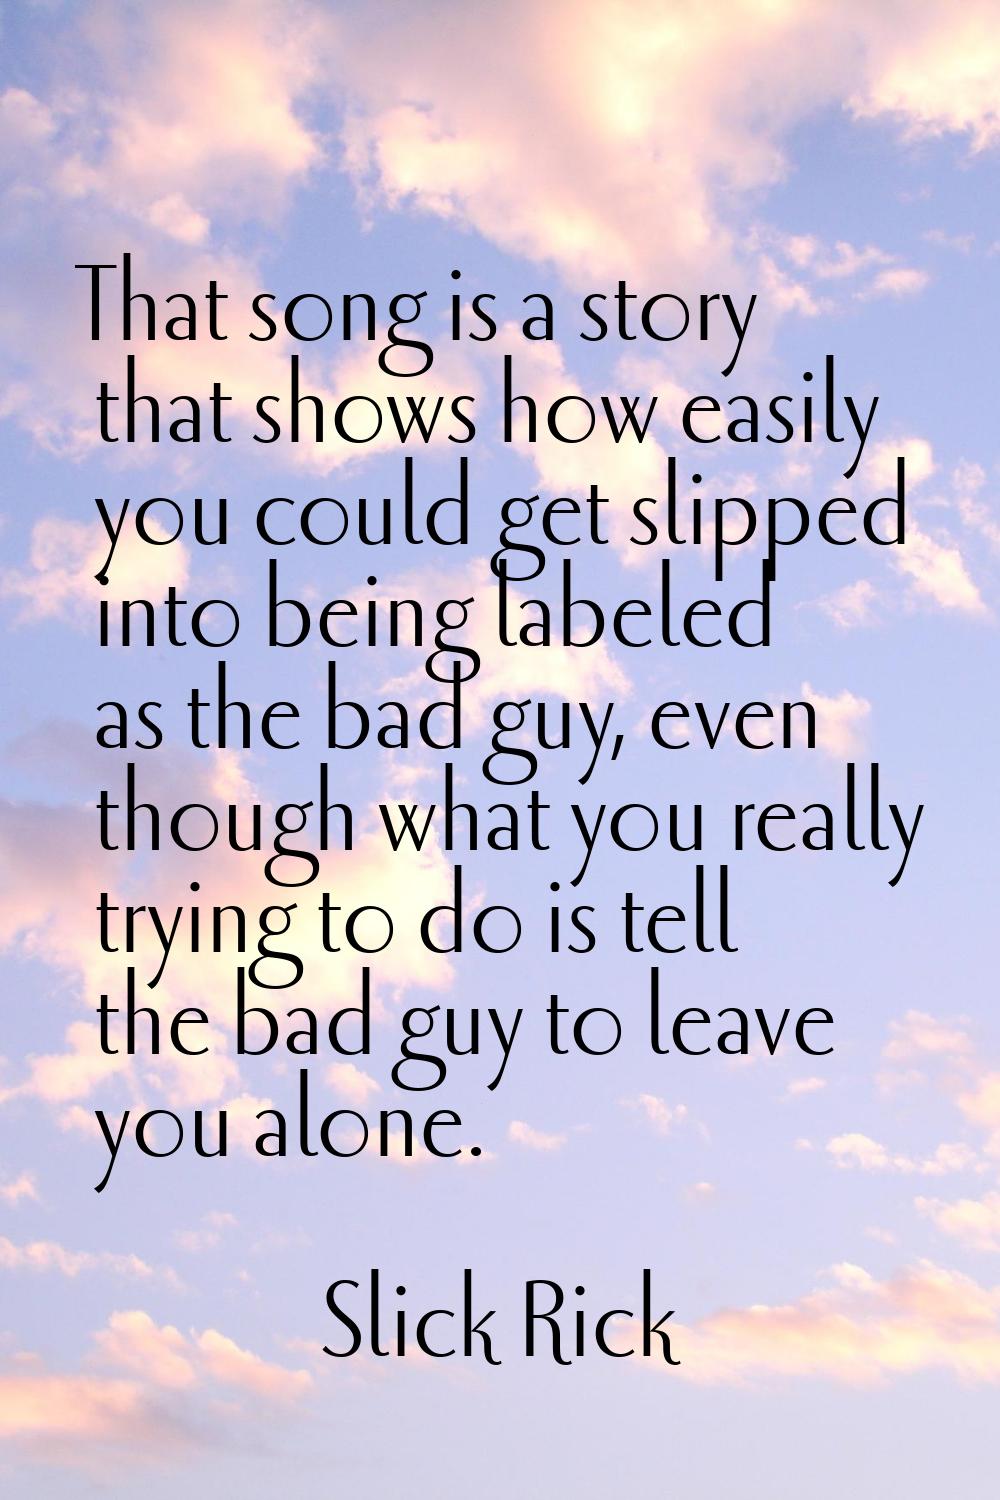 That song is a story that shows how easily you could get slipped into being labeled as the bad guy,